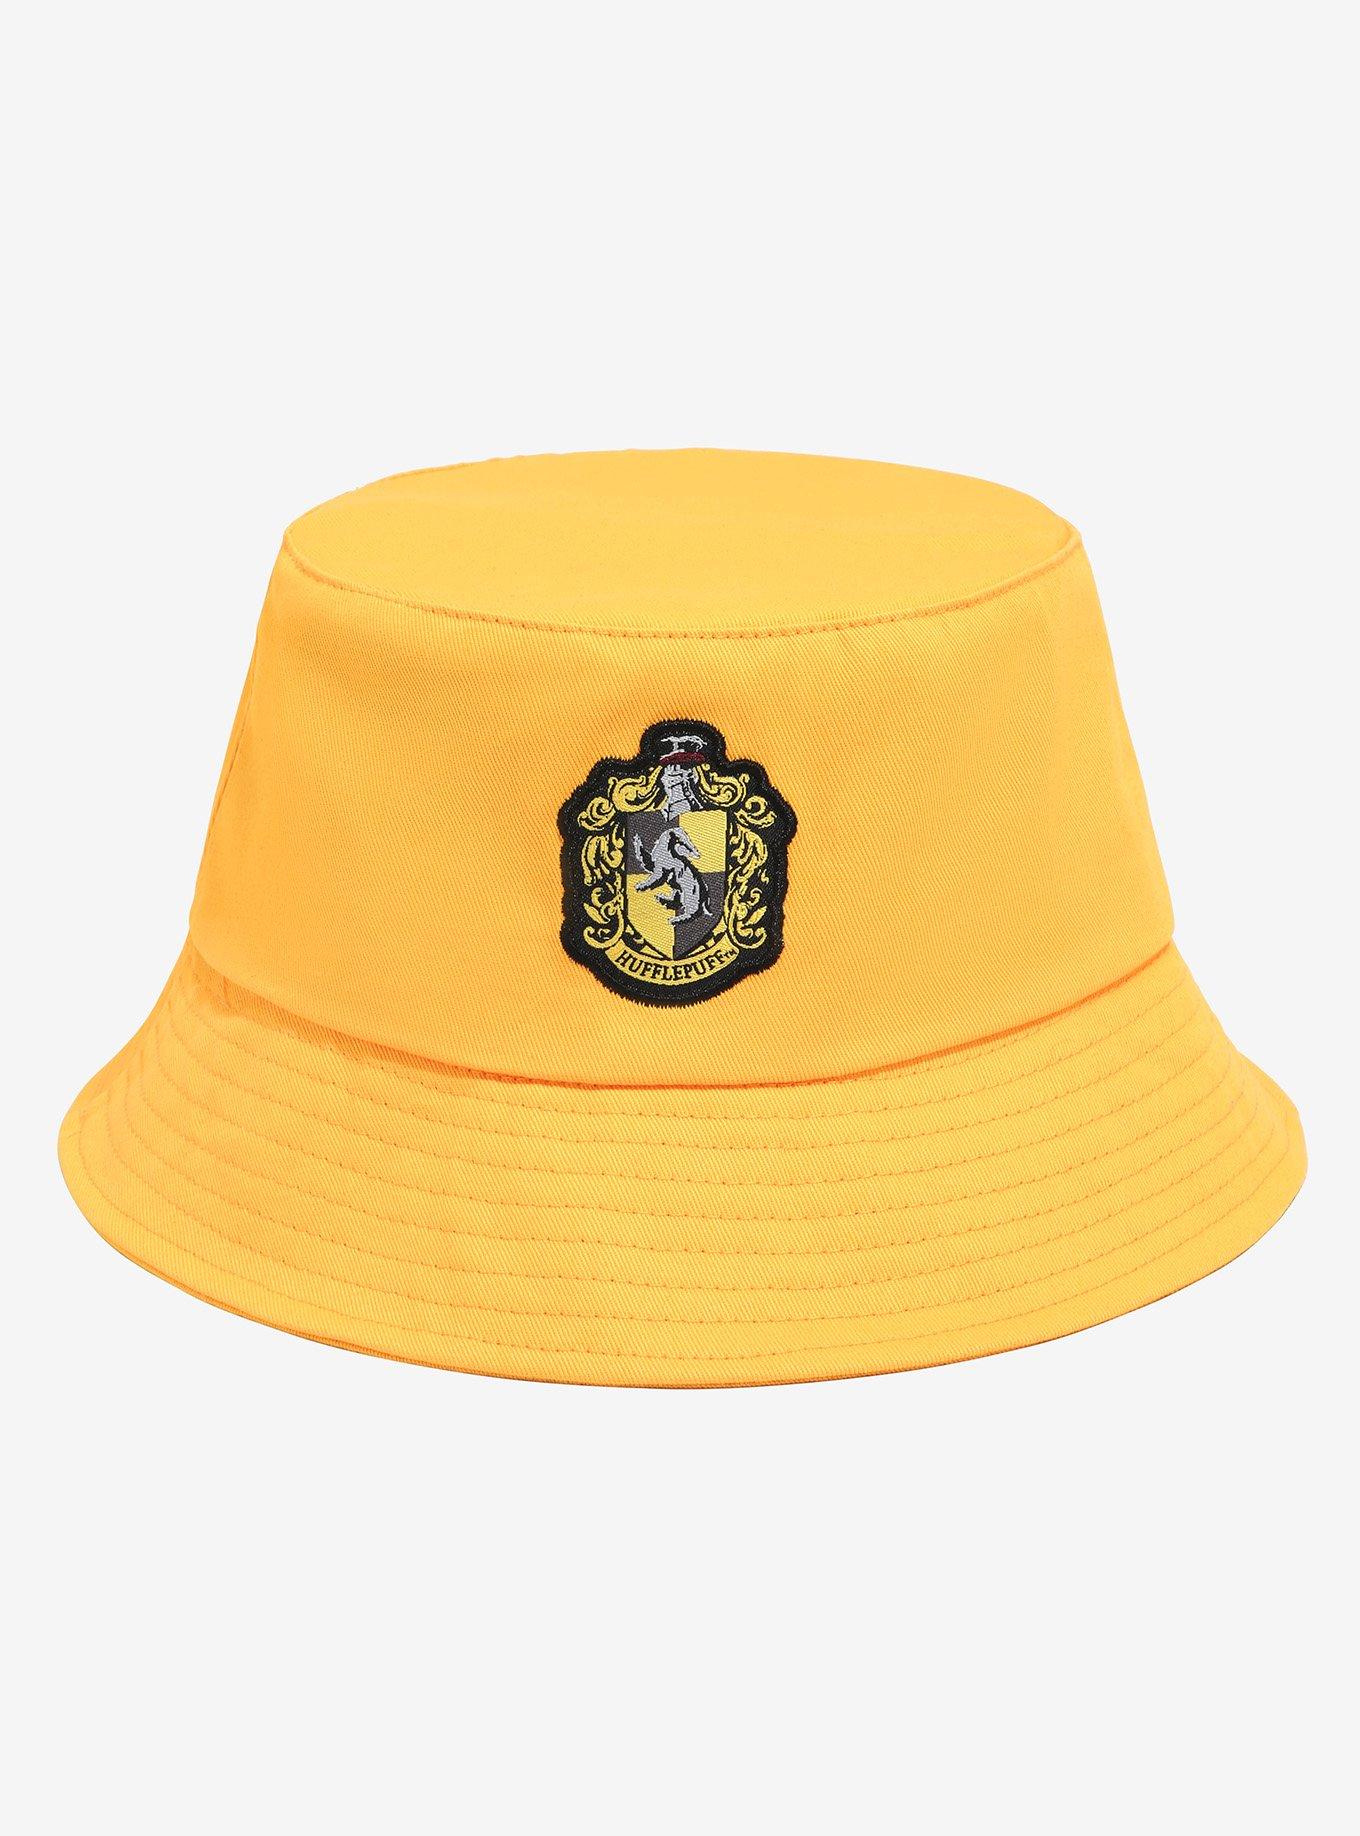 Harry Potter Hufflepuff Crest Bucket Hat - BoxLunch Exclusive | BoxLunch